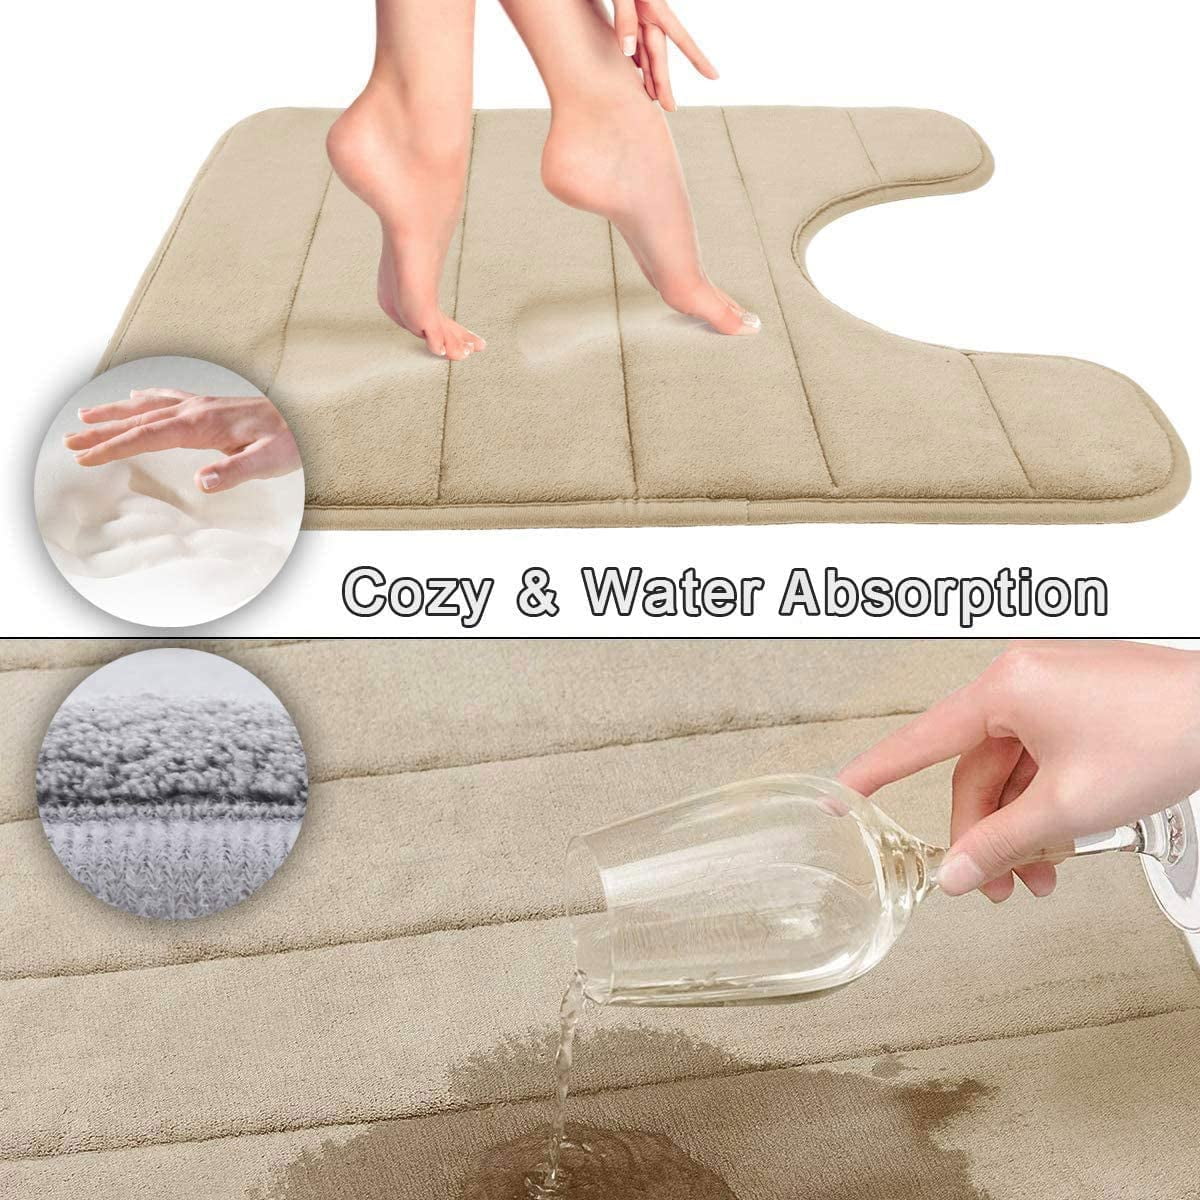 Soft and Comfortable Super Water Absorbent Yimobra Memory Foam Toilet Bath Mat U-Shaped Non-Slip Brown 24 X 20 Inches Machine Wash and Easy to Dry for Bathroom Commode Contour Rug